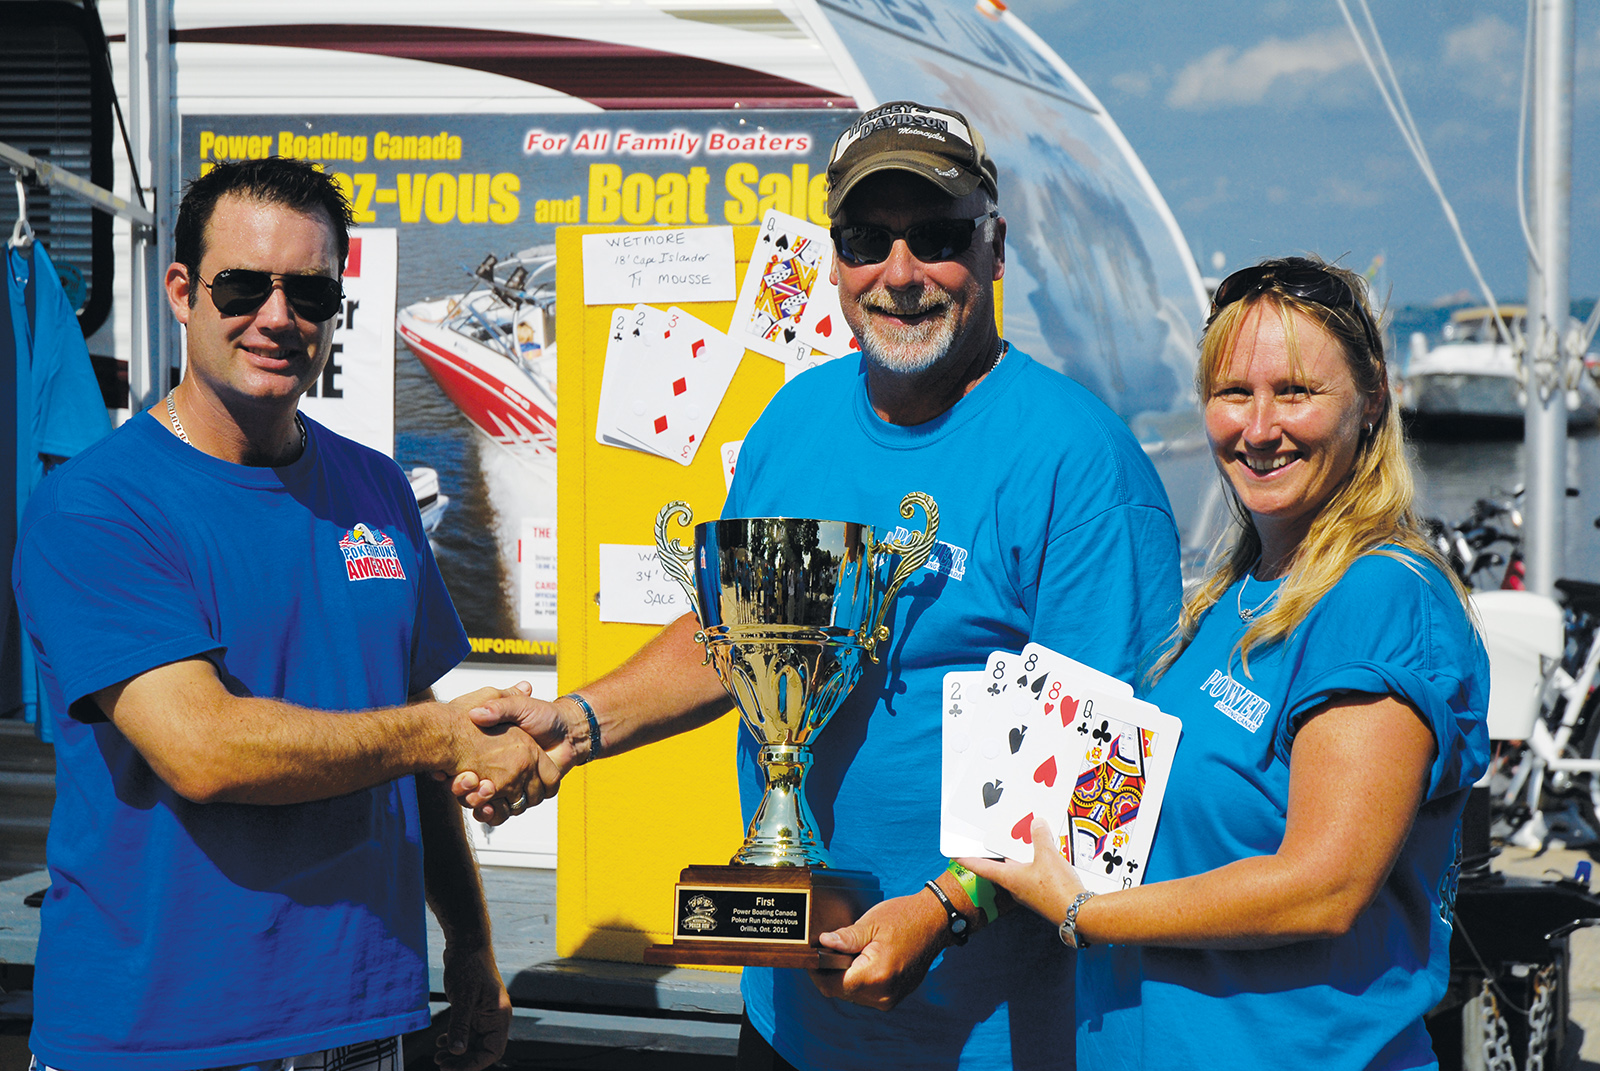 Todd Taylor presents Steve Sale, owner of Water Hog a 34’ Carver, with the First Place prizes at the final event of the 2011 Rendez-vous season in Orillia.